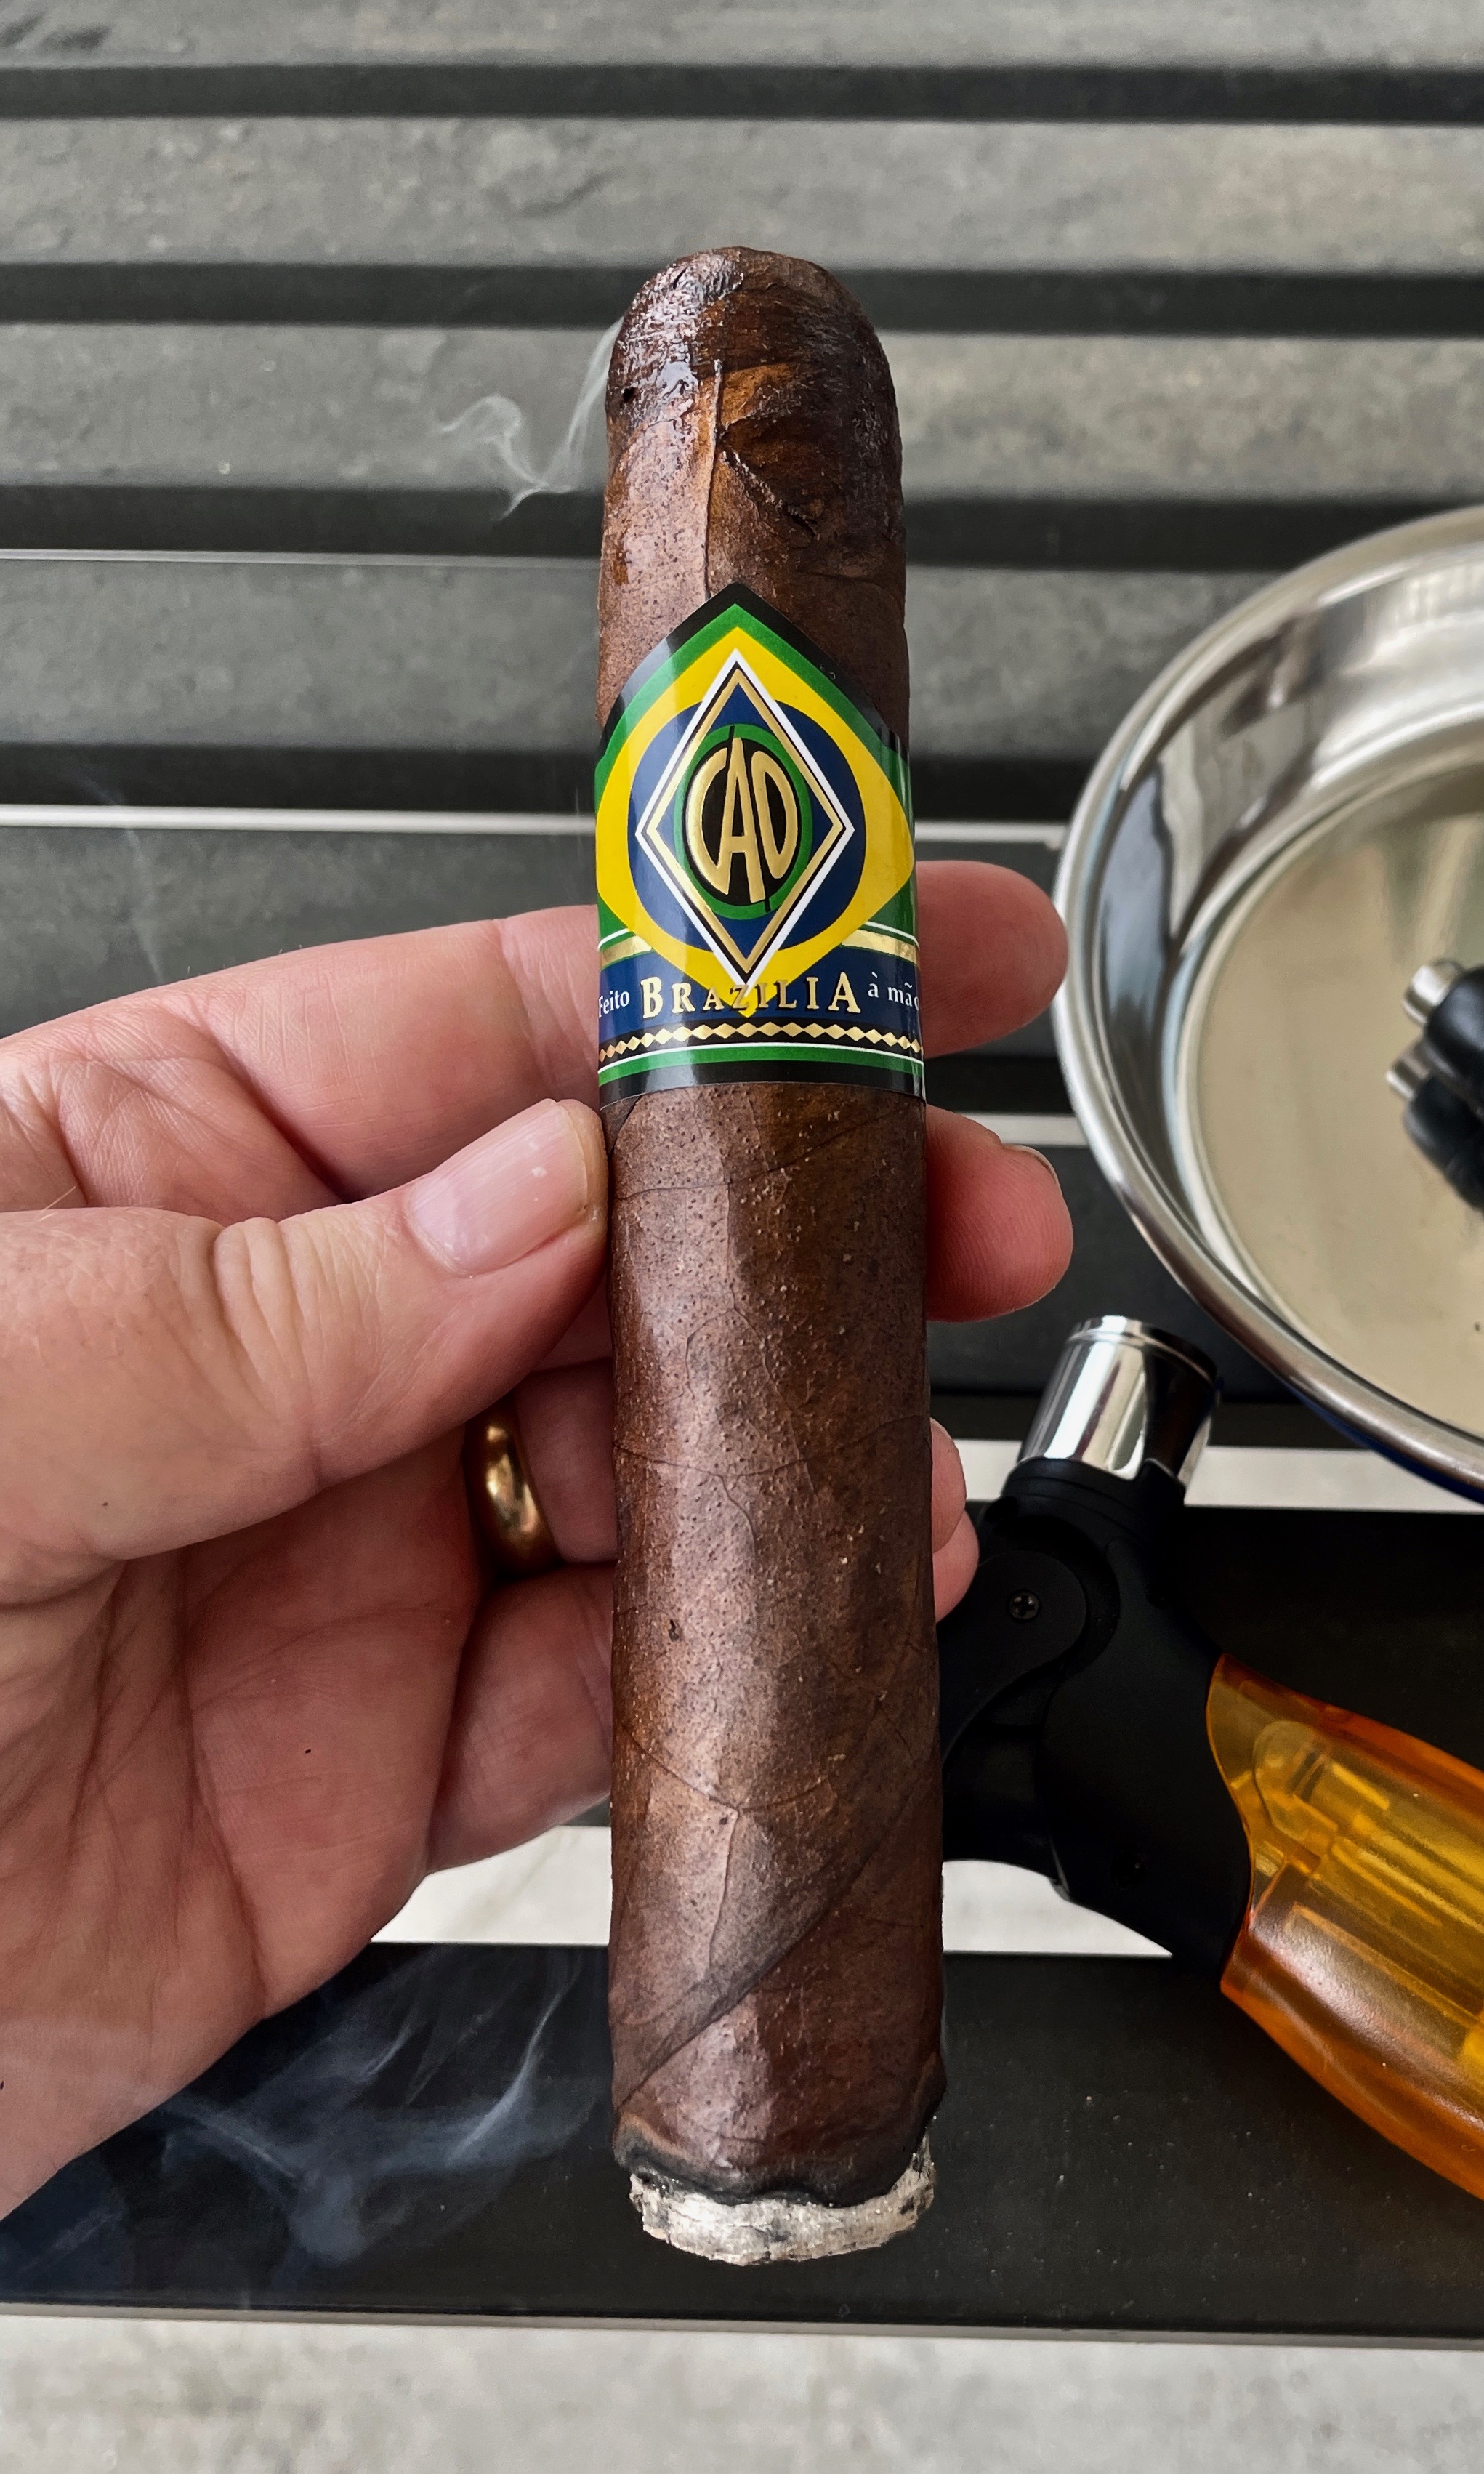 Buy CAO Brazilia  Cigars Online At Discount Prices & Save Big